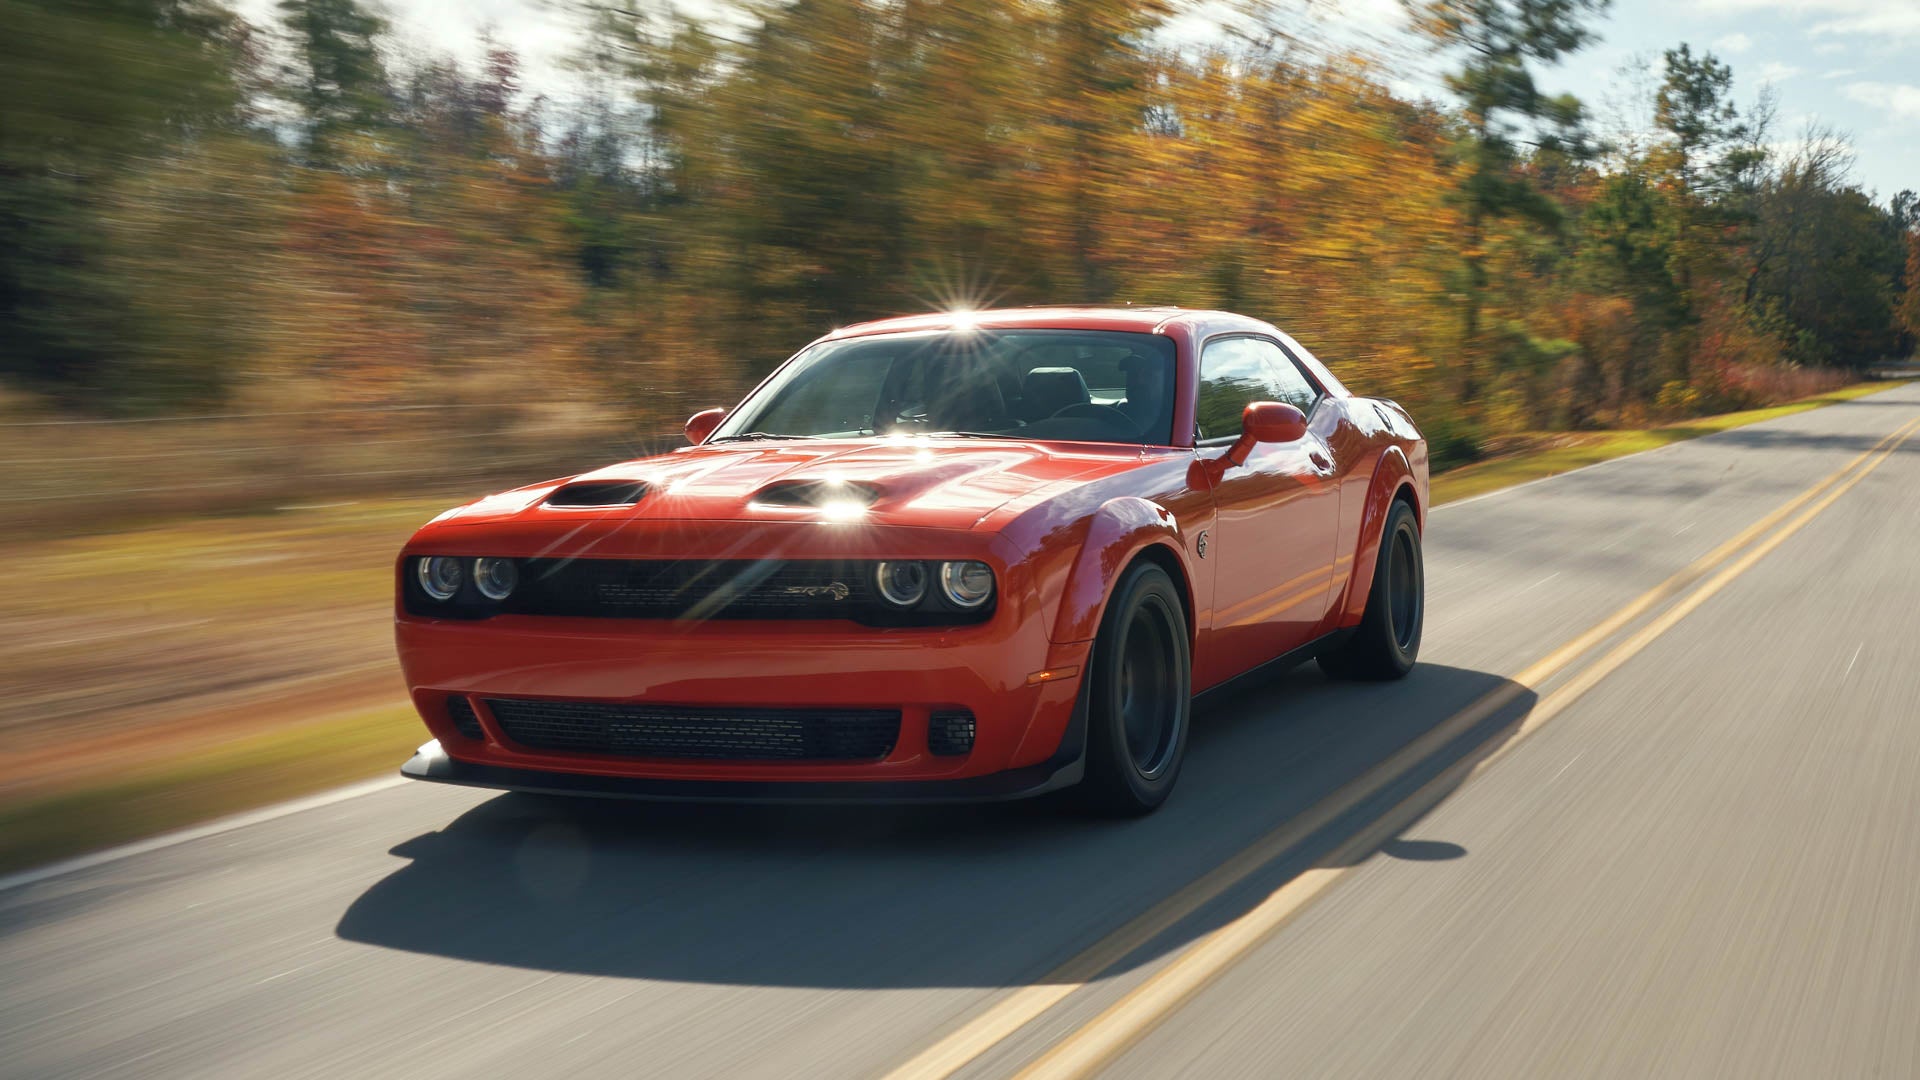 The Dodge Challenger Hellcat manual is finally back for one more ride